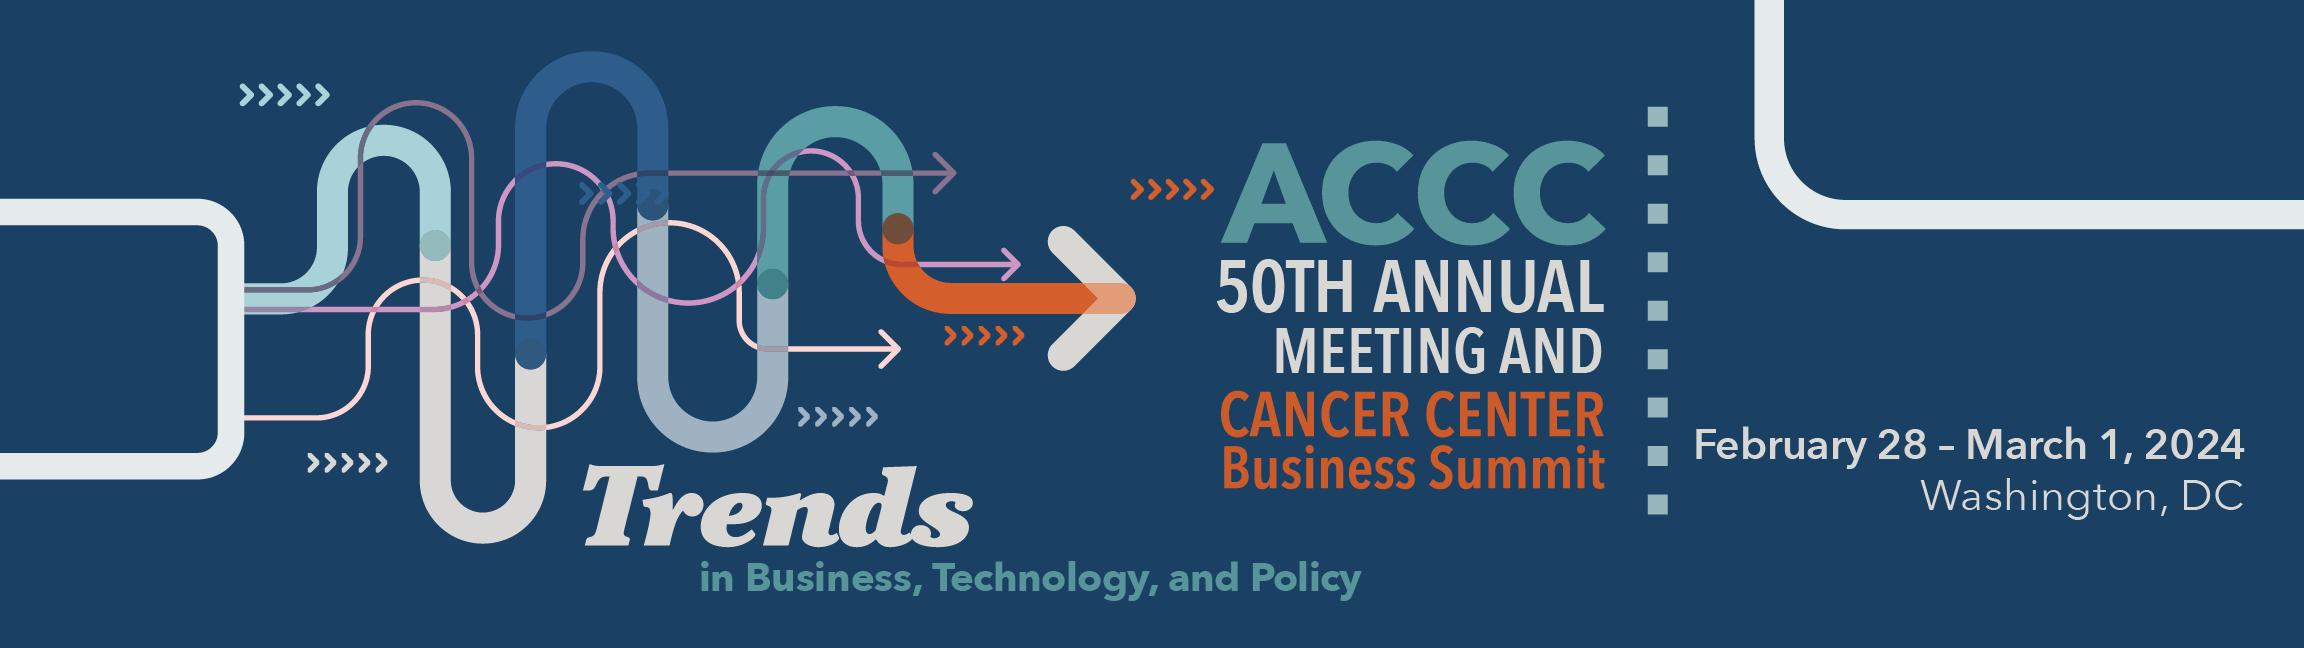 Oncology Conference 2024 - Spring Forum - NCODA